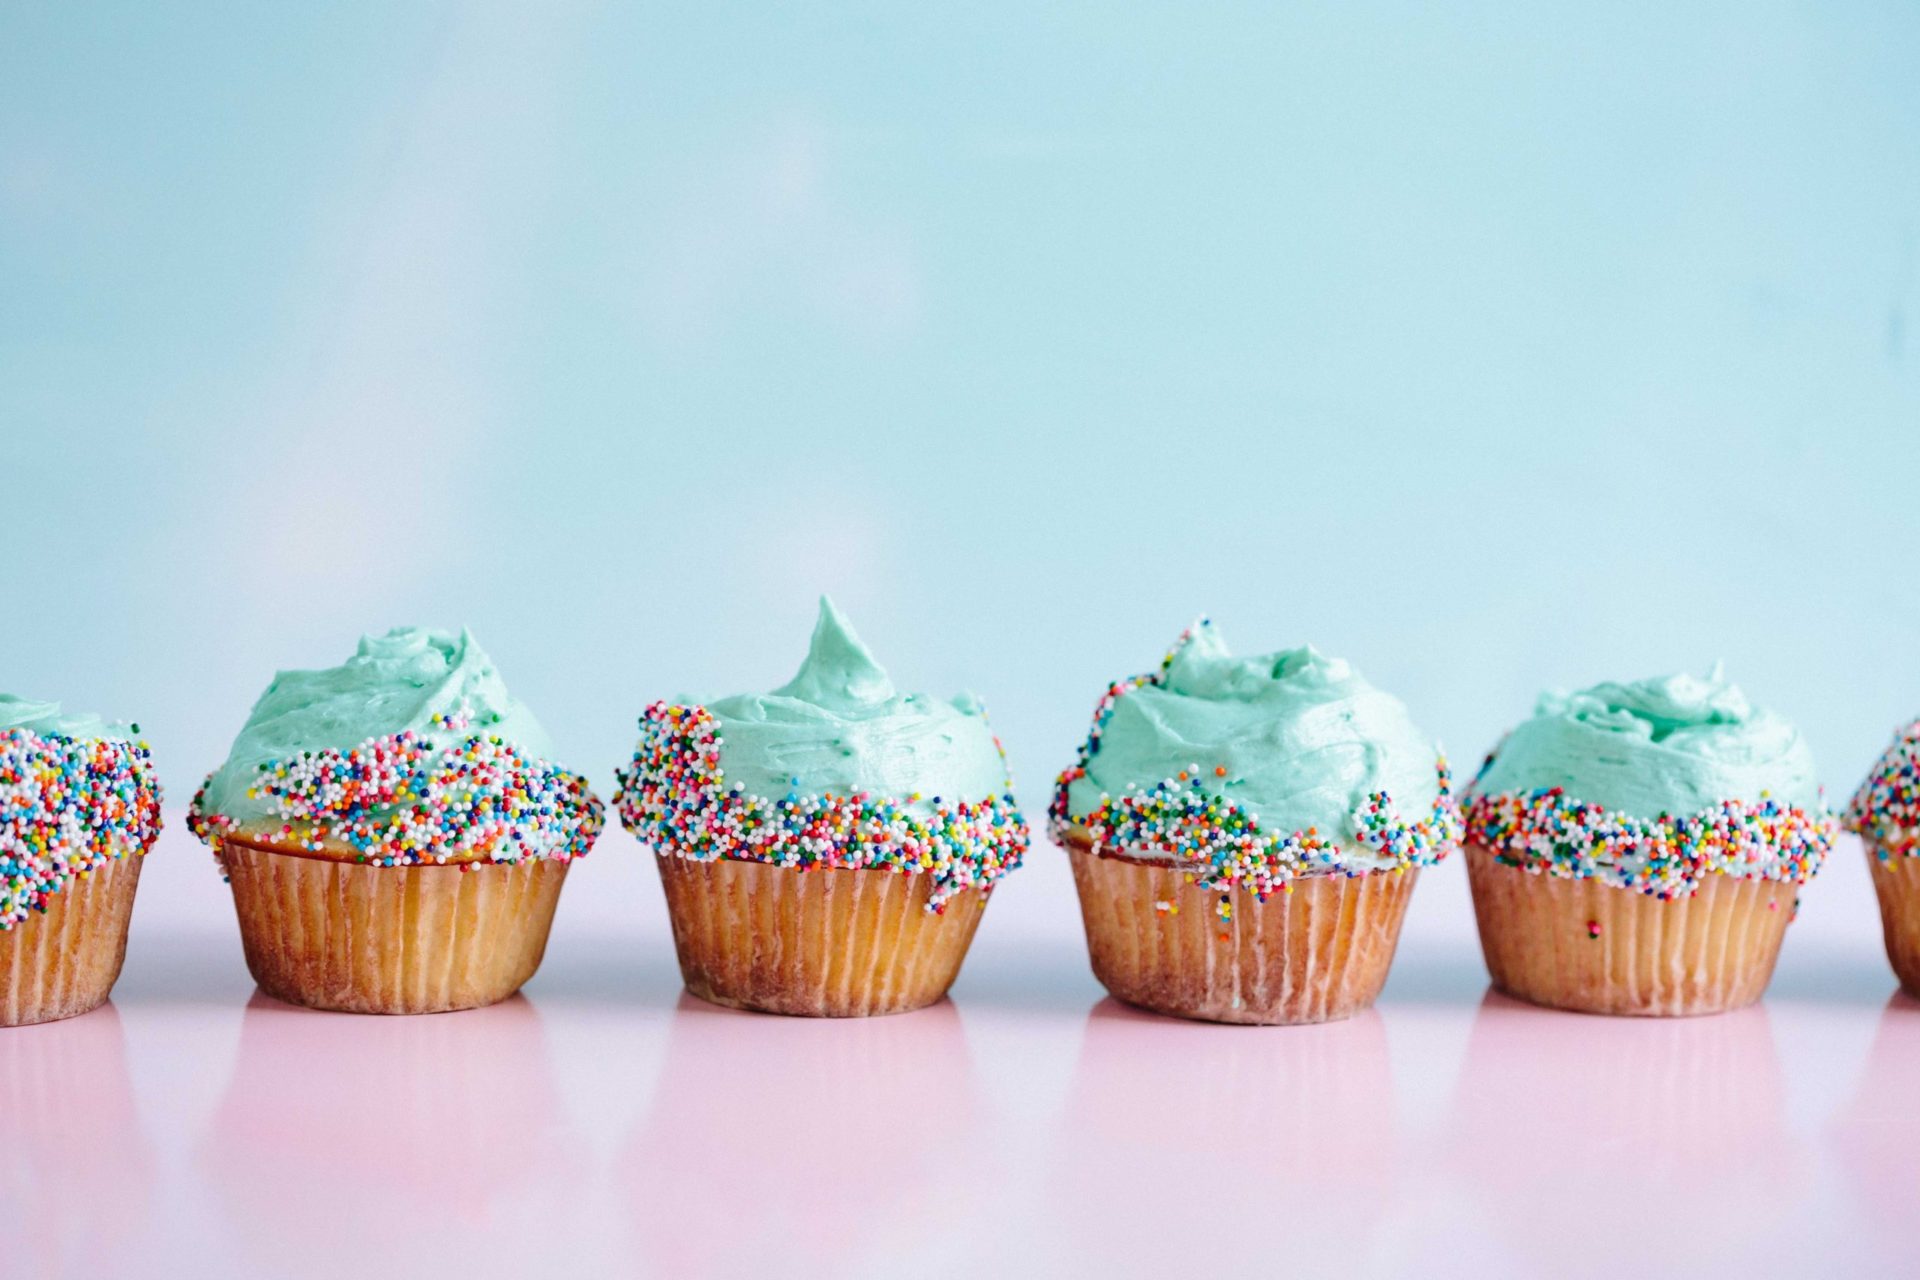 Six teal-coloured icing cupcakes with sprinkles in a row. (Photo by Brooke Lark on Unsplash)